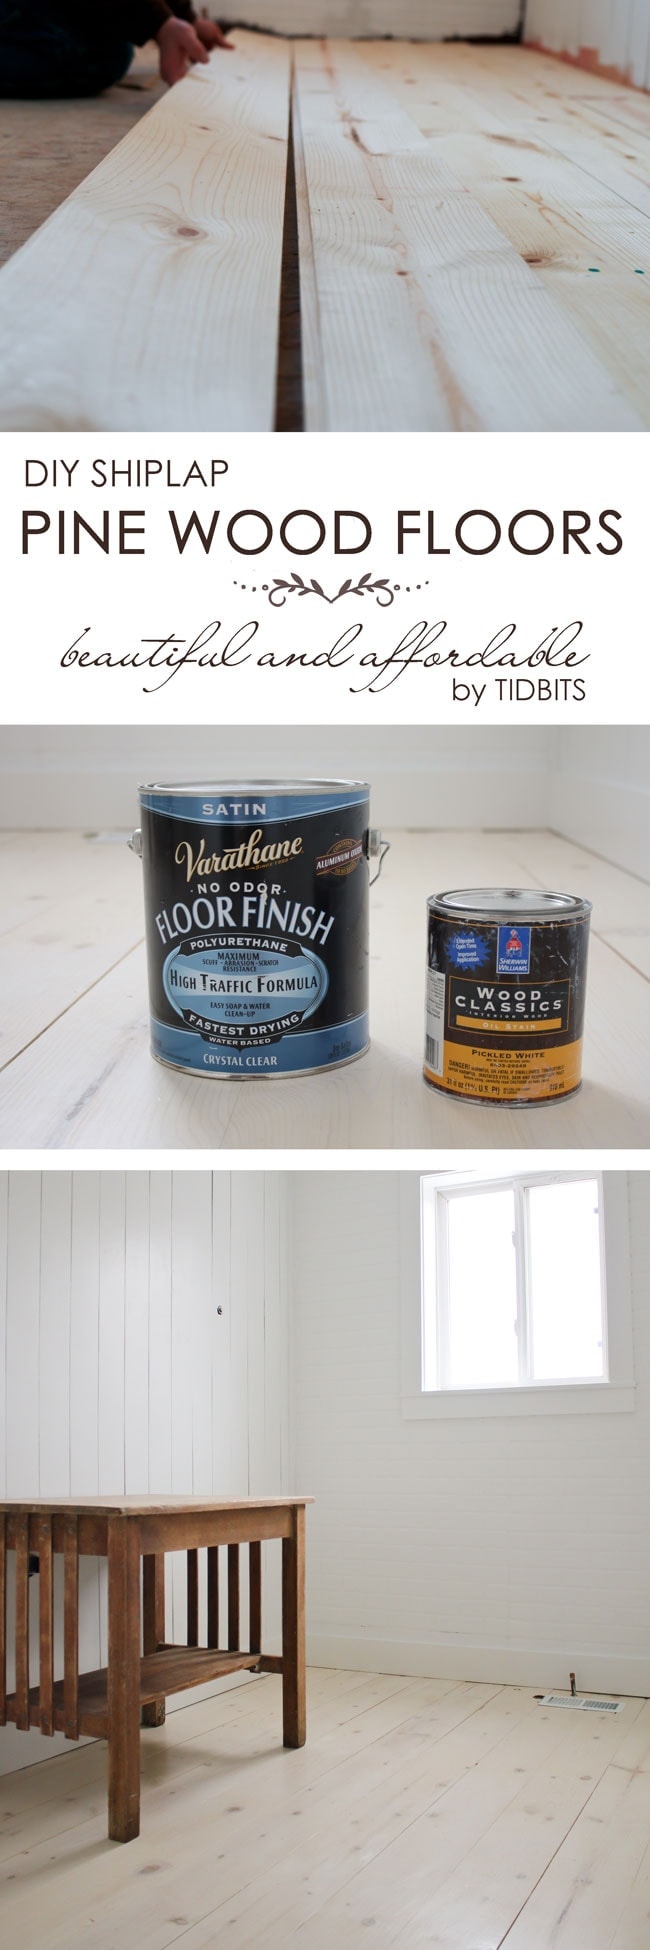 DIY Shiplap Pine Wood Floors - beautiful and affordable with a lovely whitewashed look!